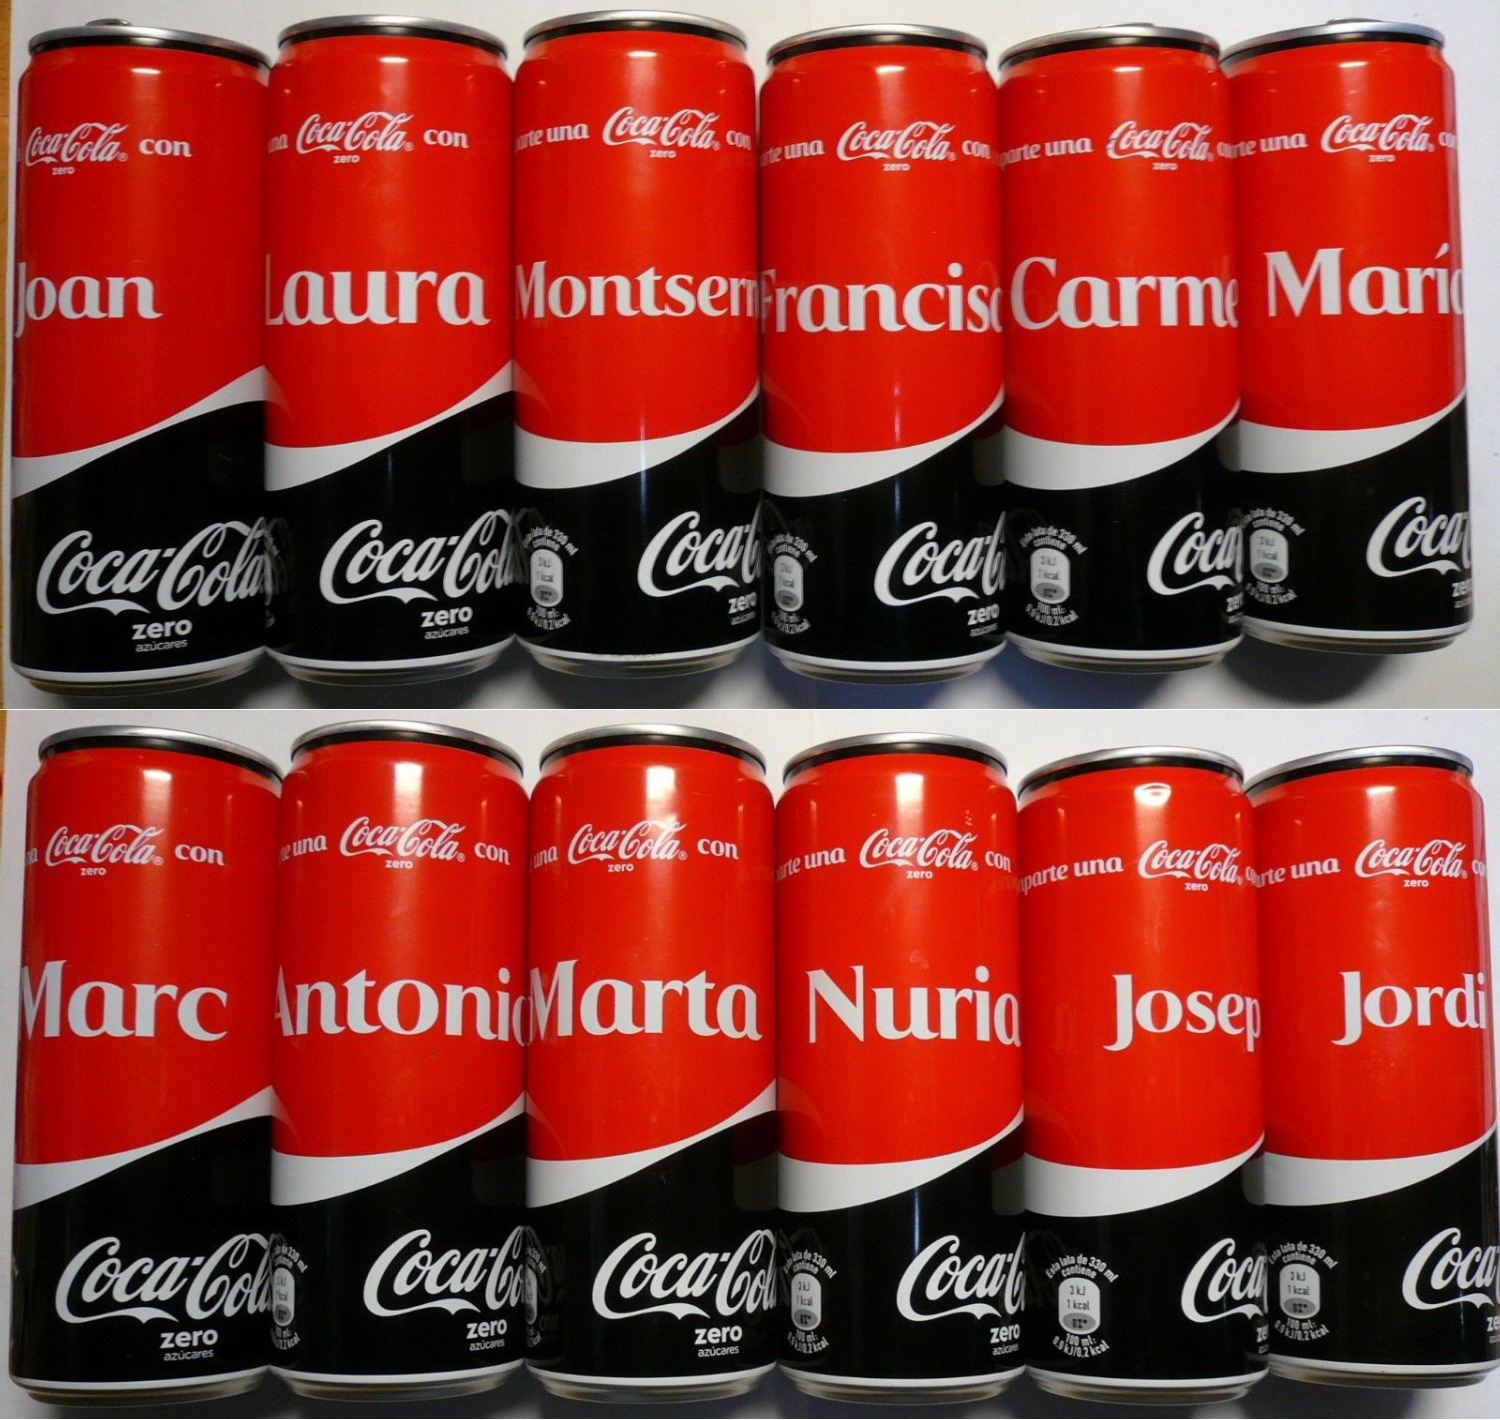 Marking on cans